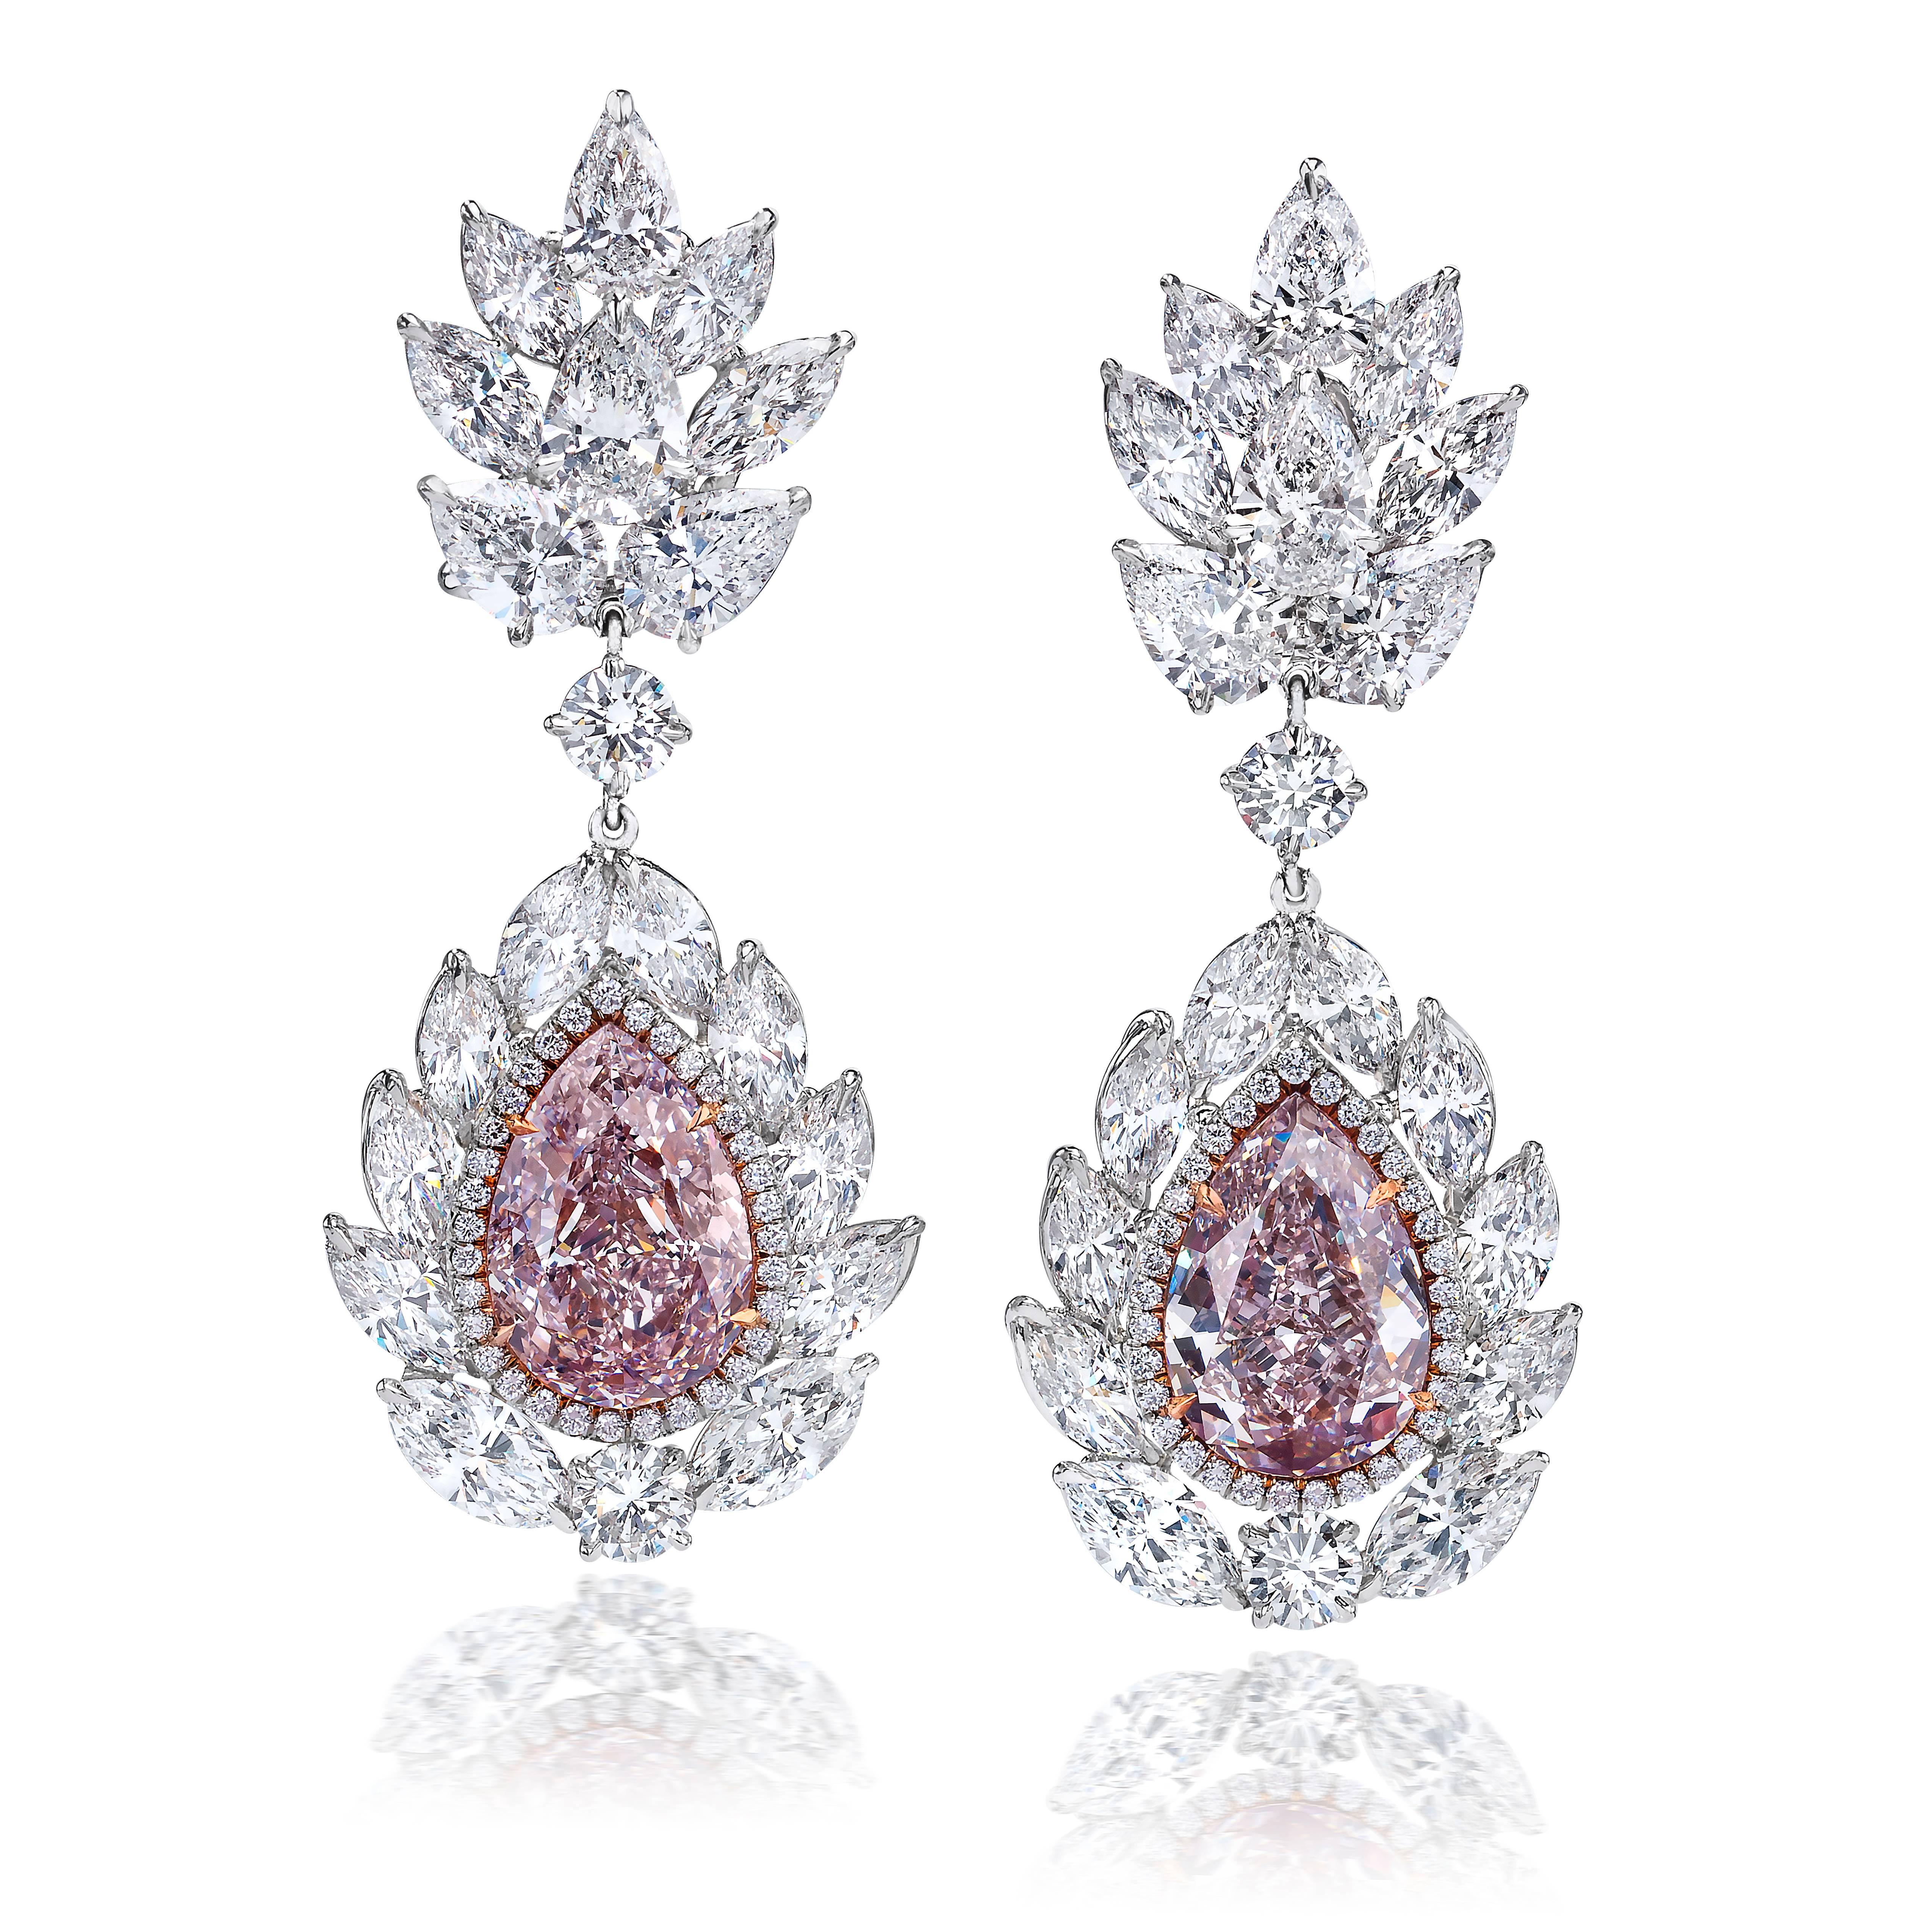 Unique pink diamond earrings!!!!!

Two pear-shaped pink diamonds surrounded by 28 marquise, 8 pear & 4 brilliant shape diamonds with the total weight of 11.75 carats set in platinum.

Pink diamond info:
3.59 carat pear shape natural light pink